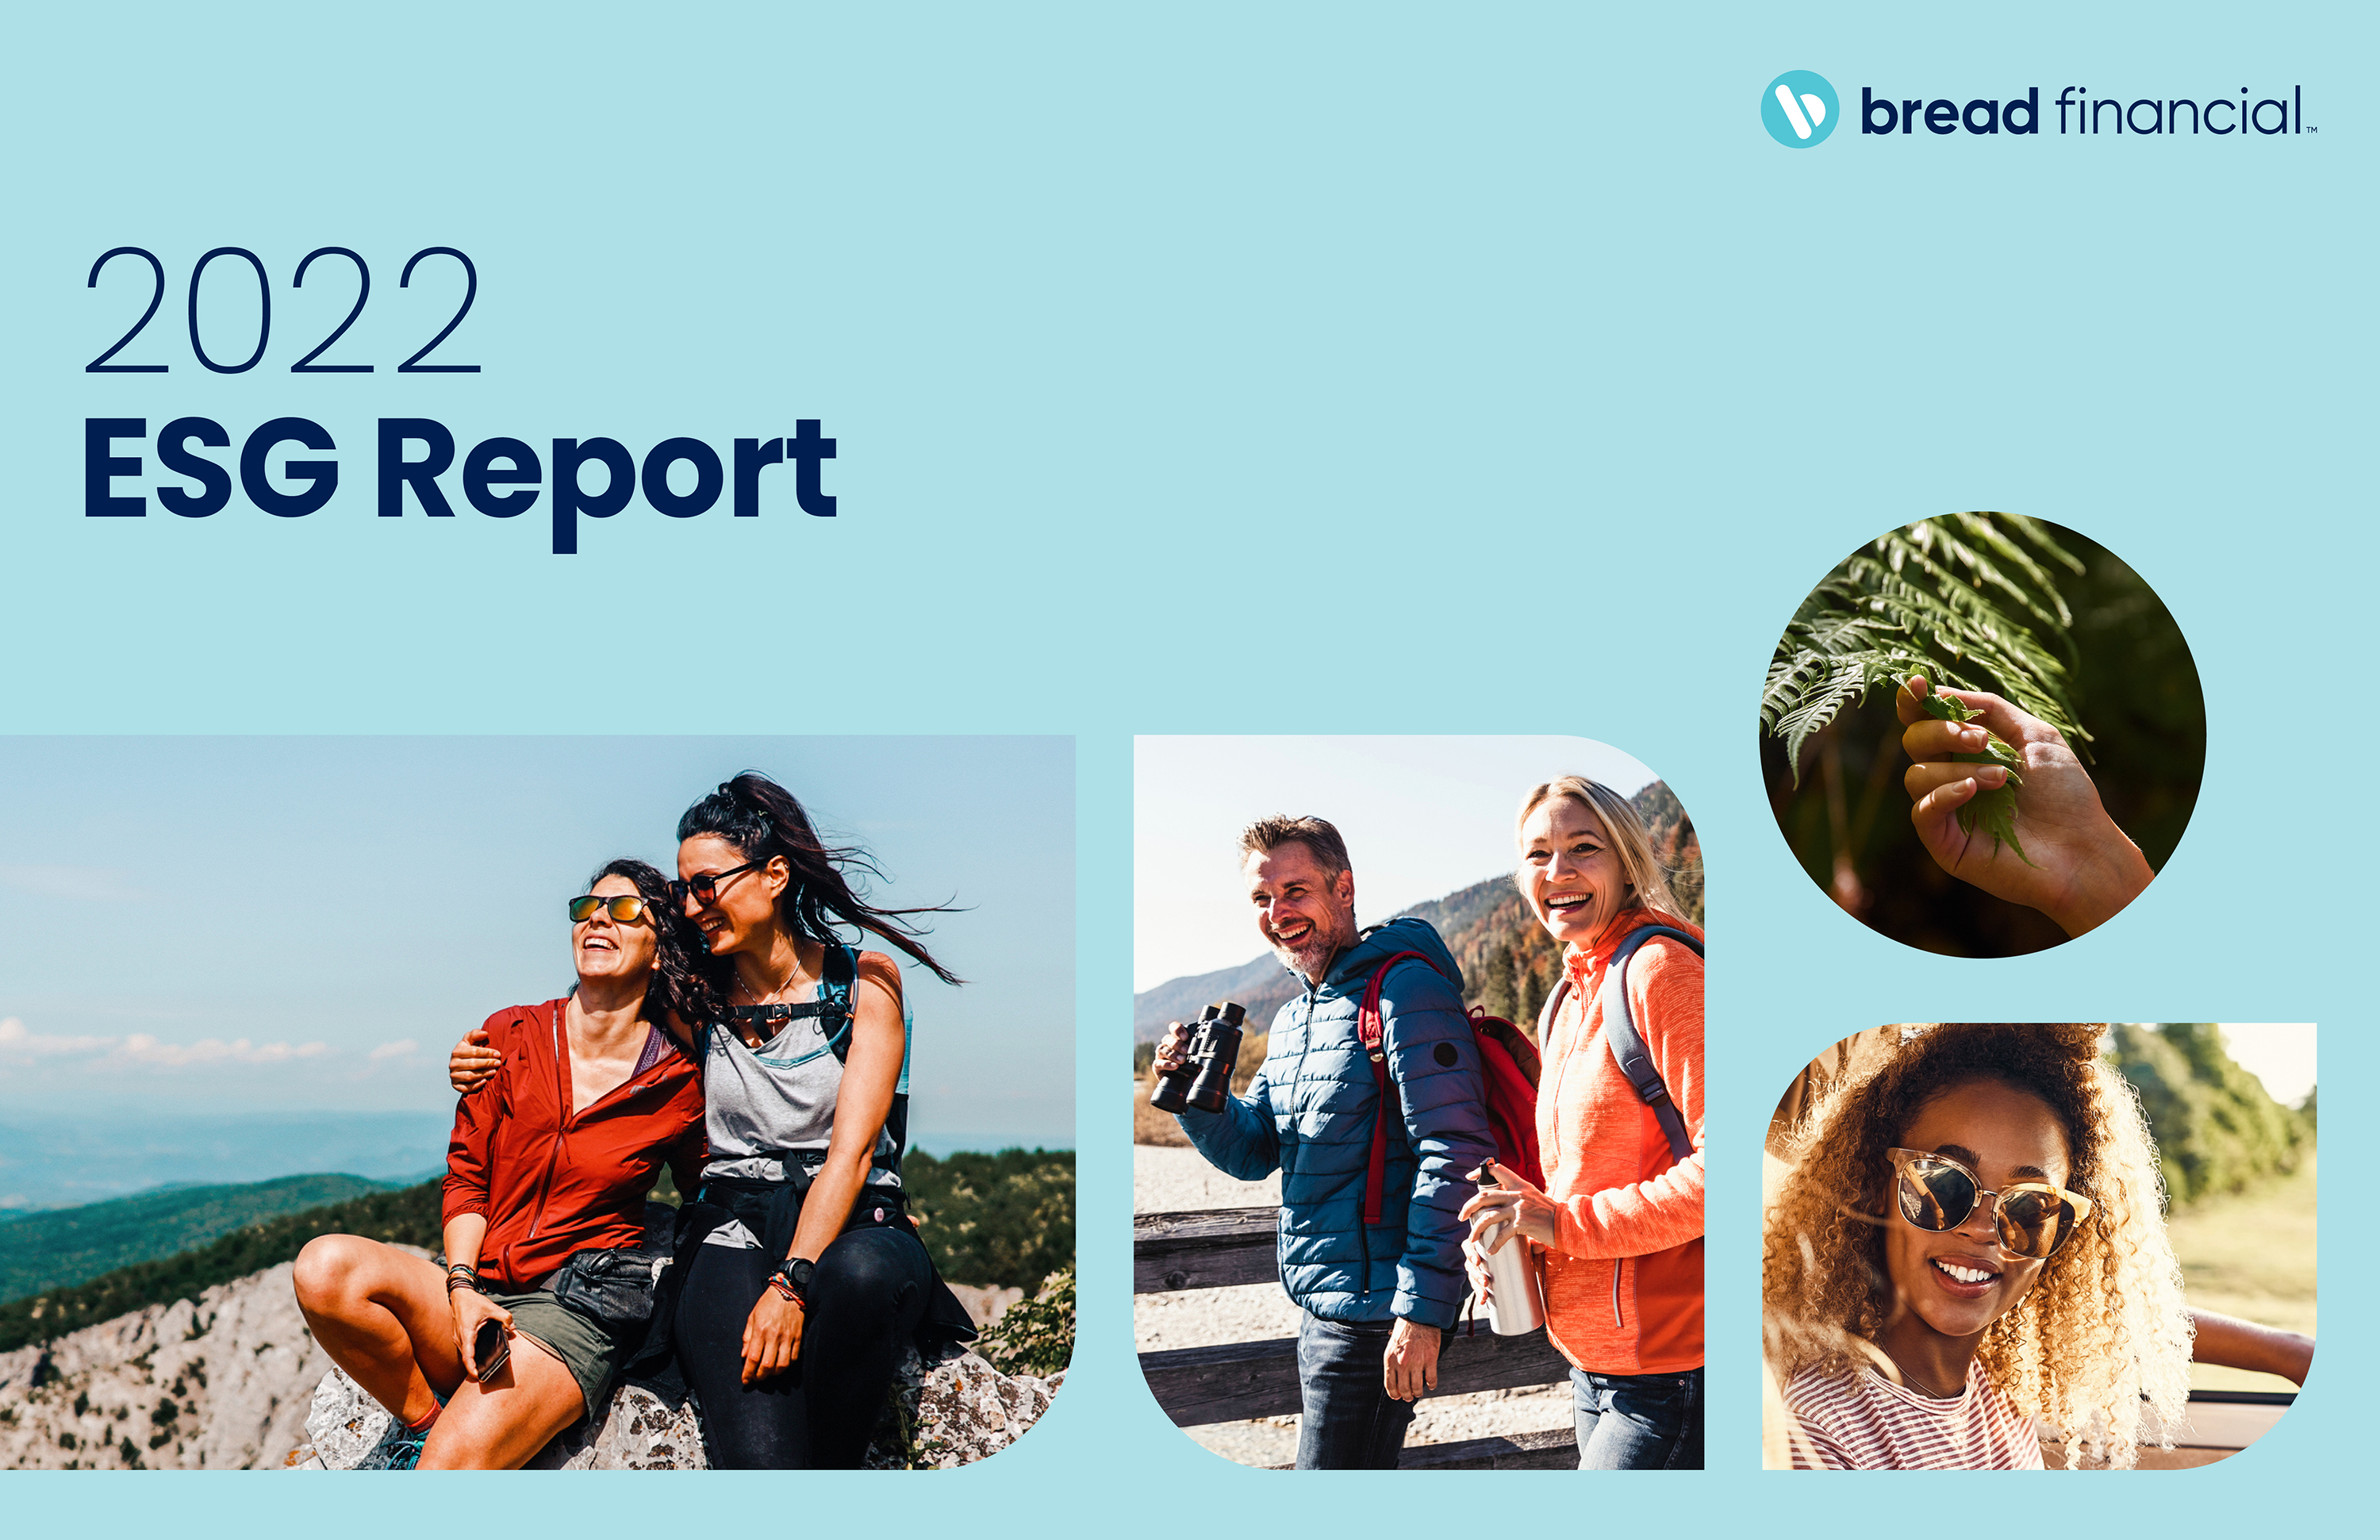 2022 ESG Report with images of smiling and active people